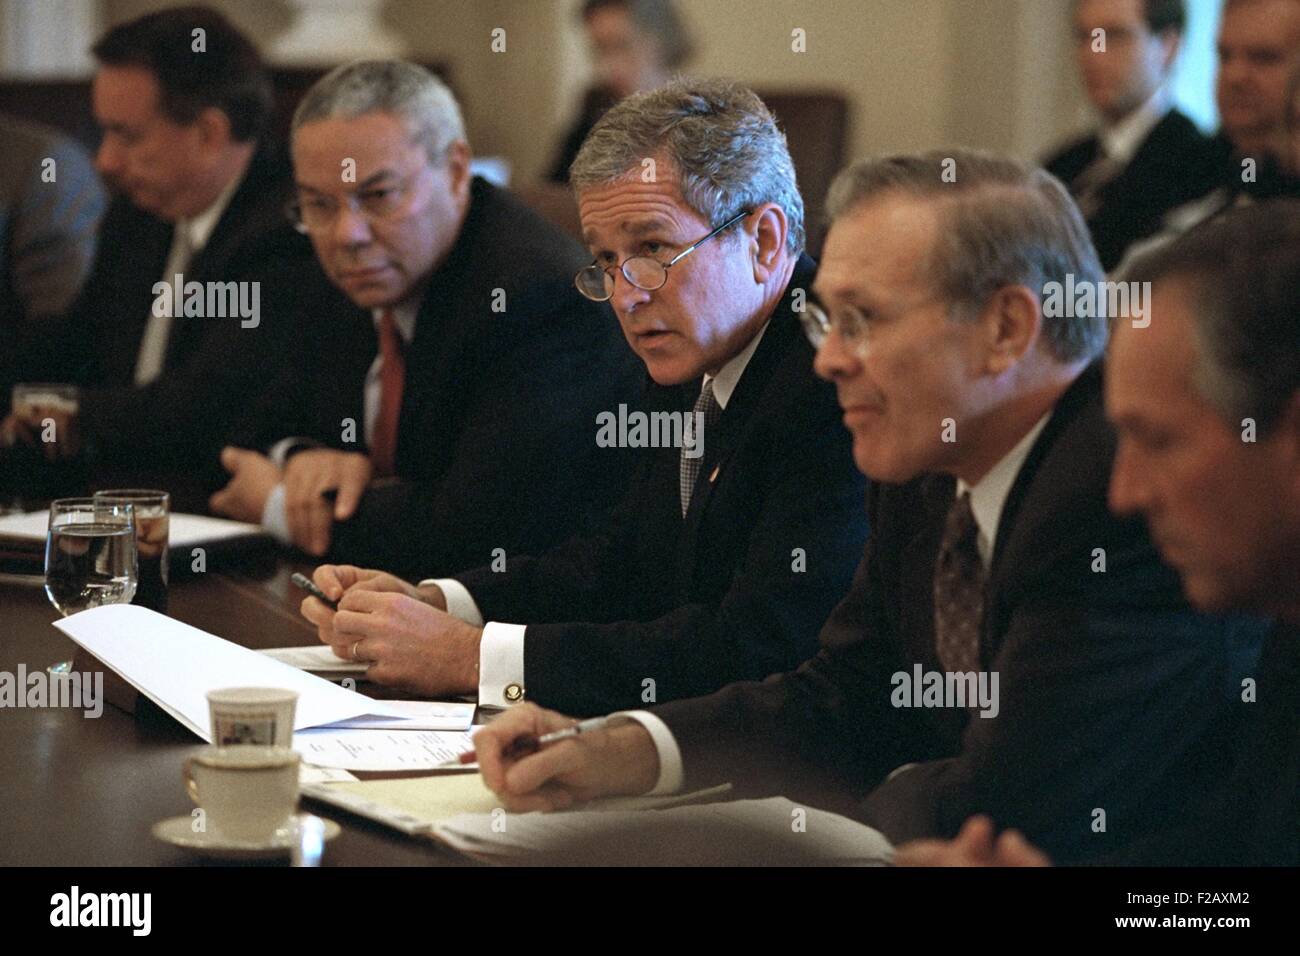 President George W. Bush Meets with his Cabinet on Oct. 10, 2001. Flanking Bush 43 are Sec. of State, Colin Powell (left); and Sec. of Defense Donald Rumsfeld. Operation Enduring Freedom combat in Afghanistan started four days earlier on October 7, 2001. (BSLOC 2015 2 174) Stock Photo